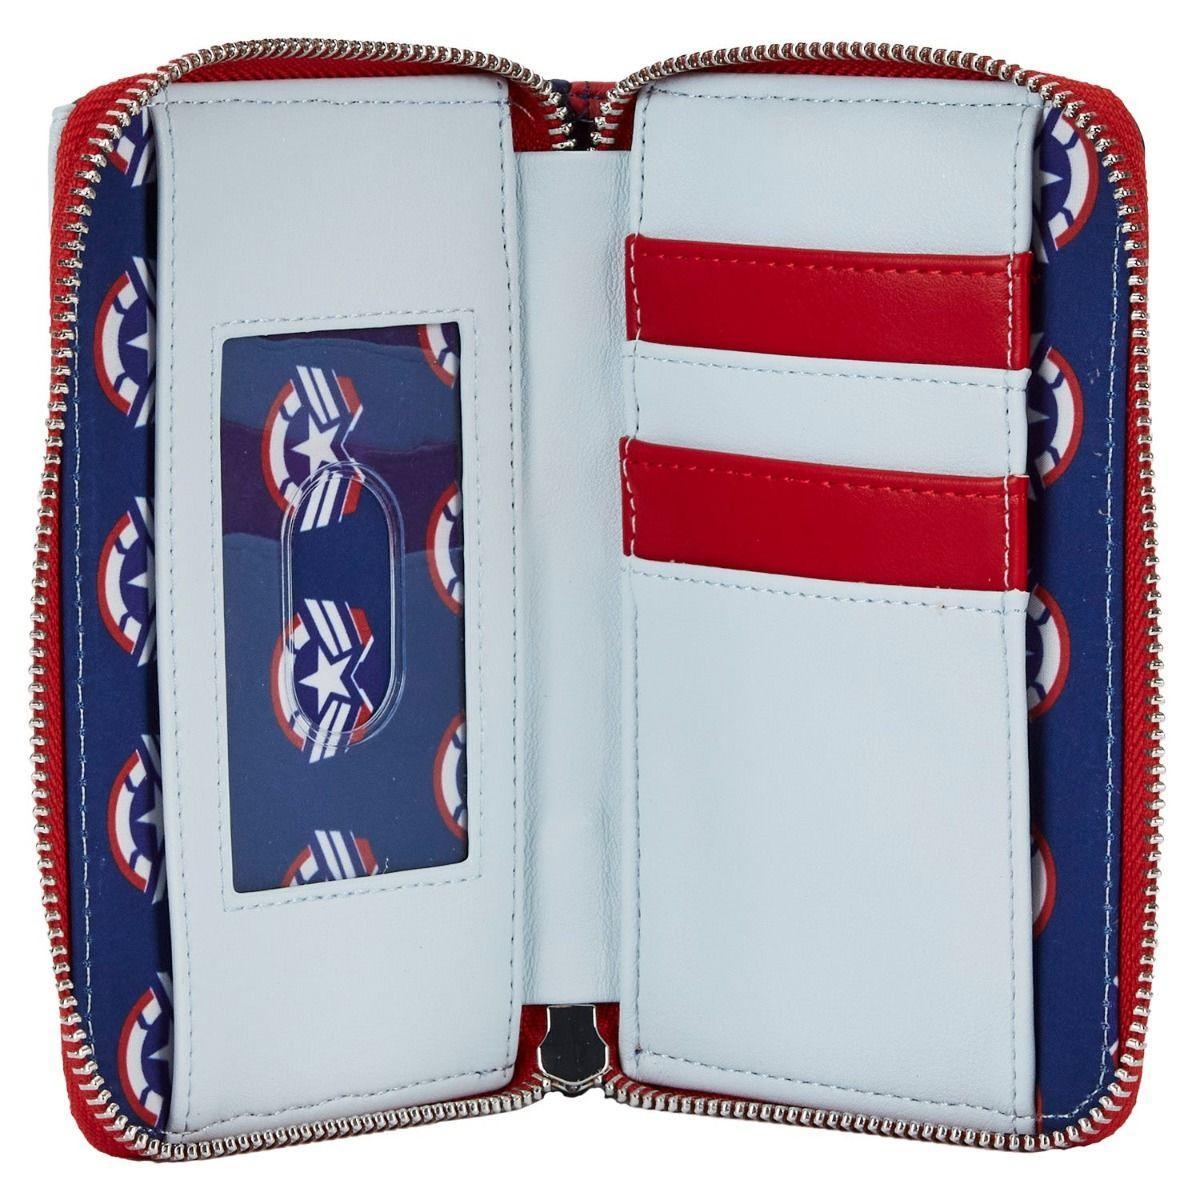 LOUMVWA0161 The Falcon and the Winter Soldier - Captain America Zip Purse - Loungefly - Titan Pop Culture